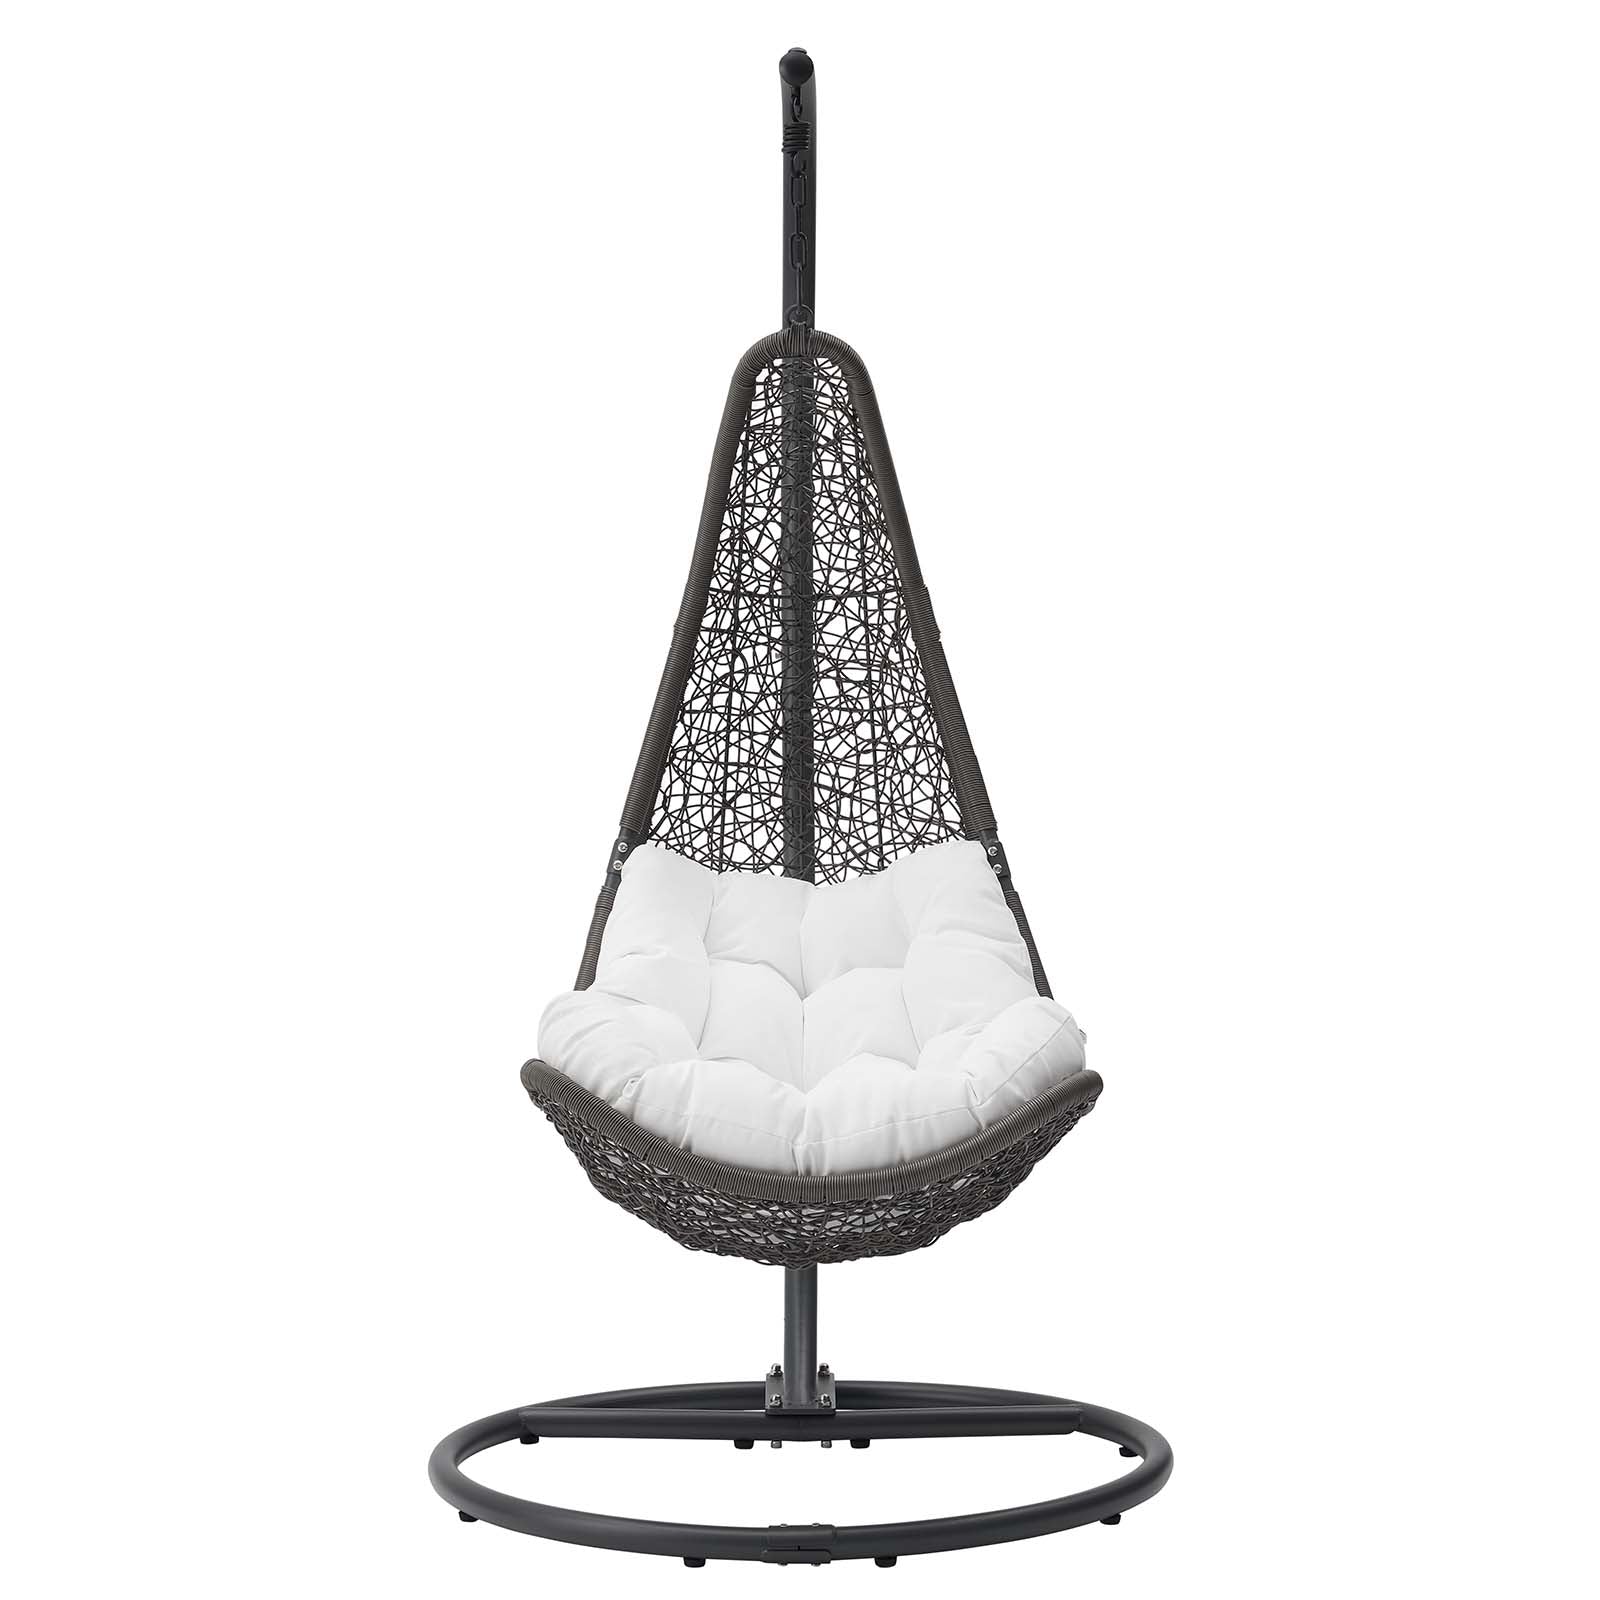 Modway Outdoor Swings - Abate Outdoor Patio Swing Chair With Stand Gray White